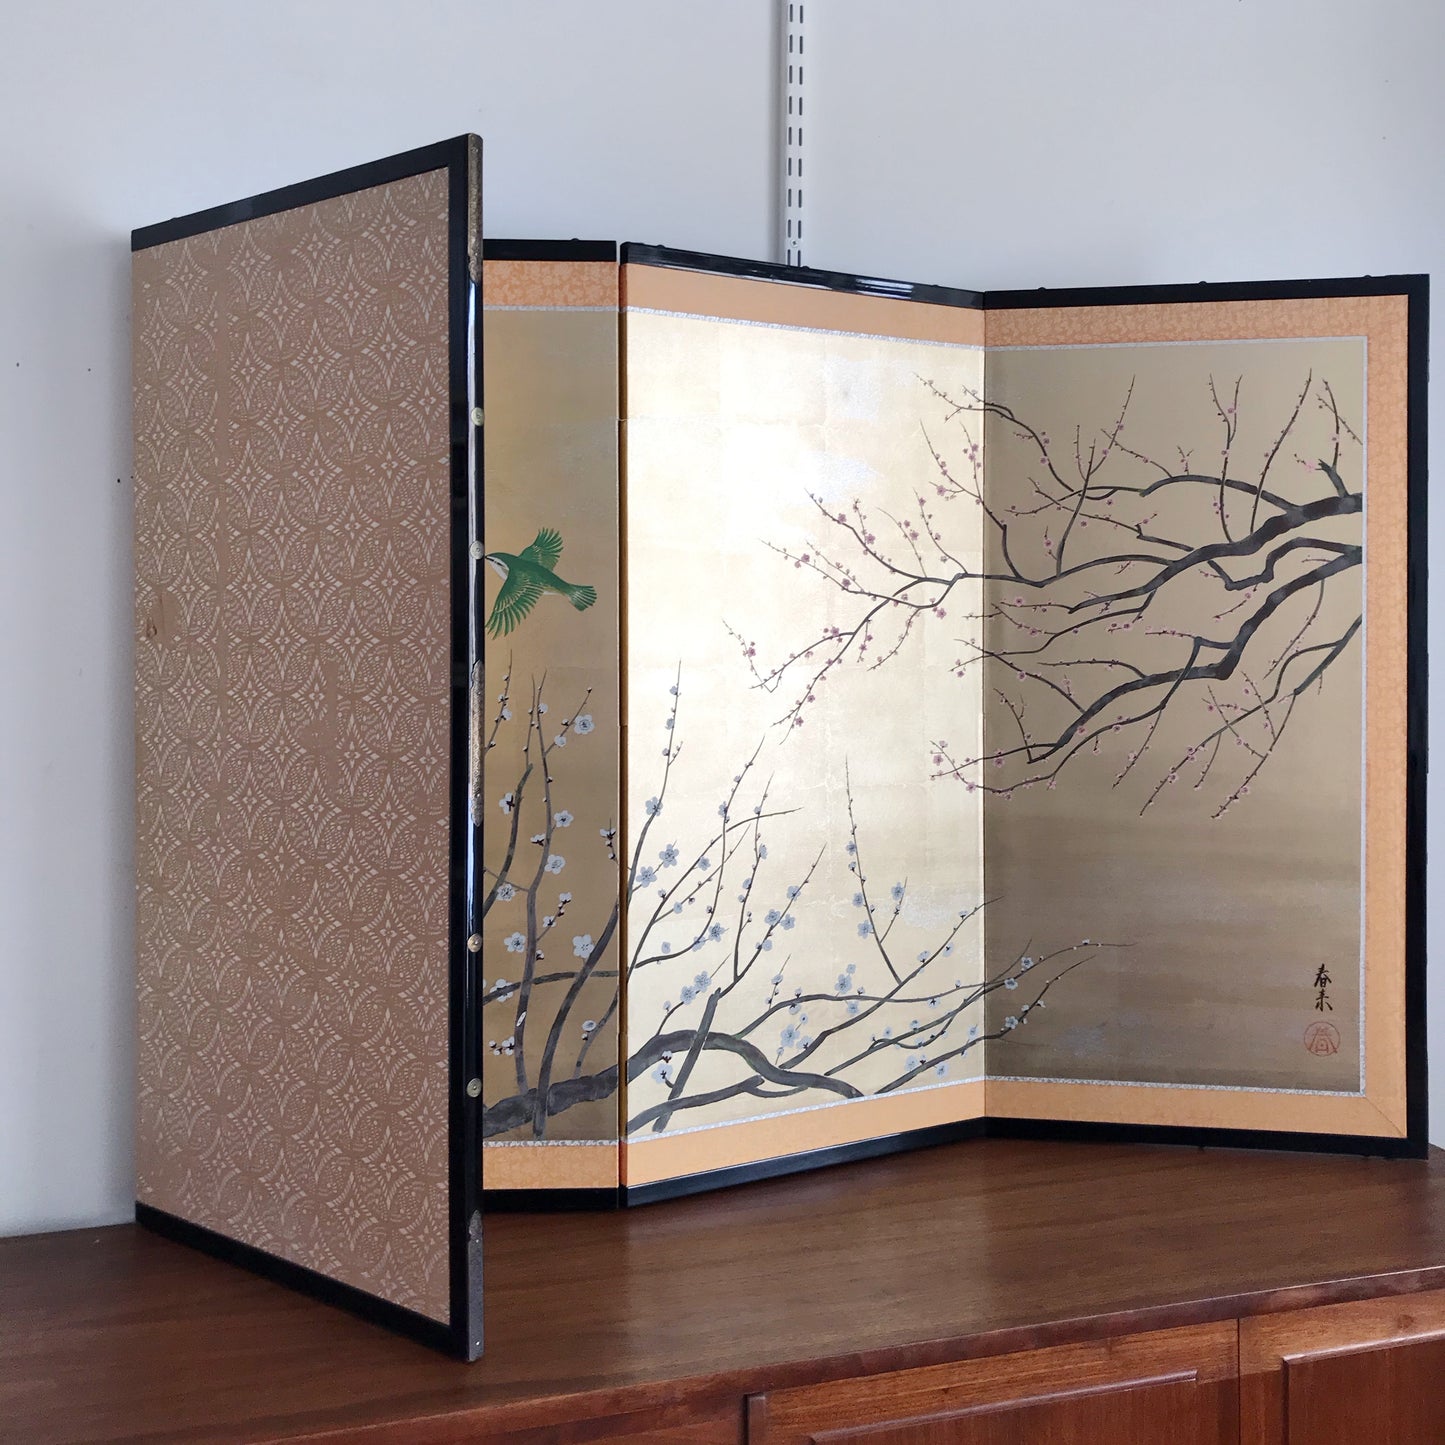 Vintage Hand-Painted Folding Screen / Room Divider (70" x 36")